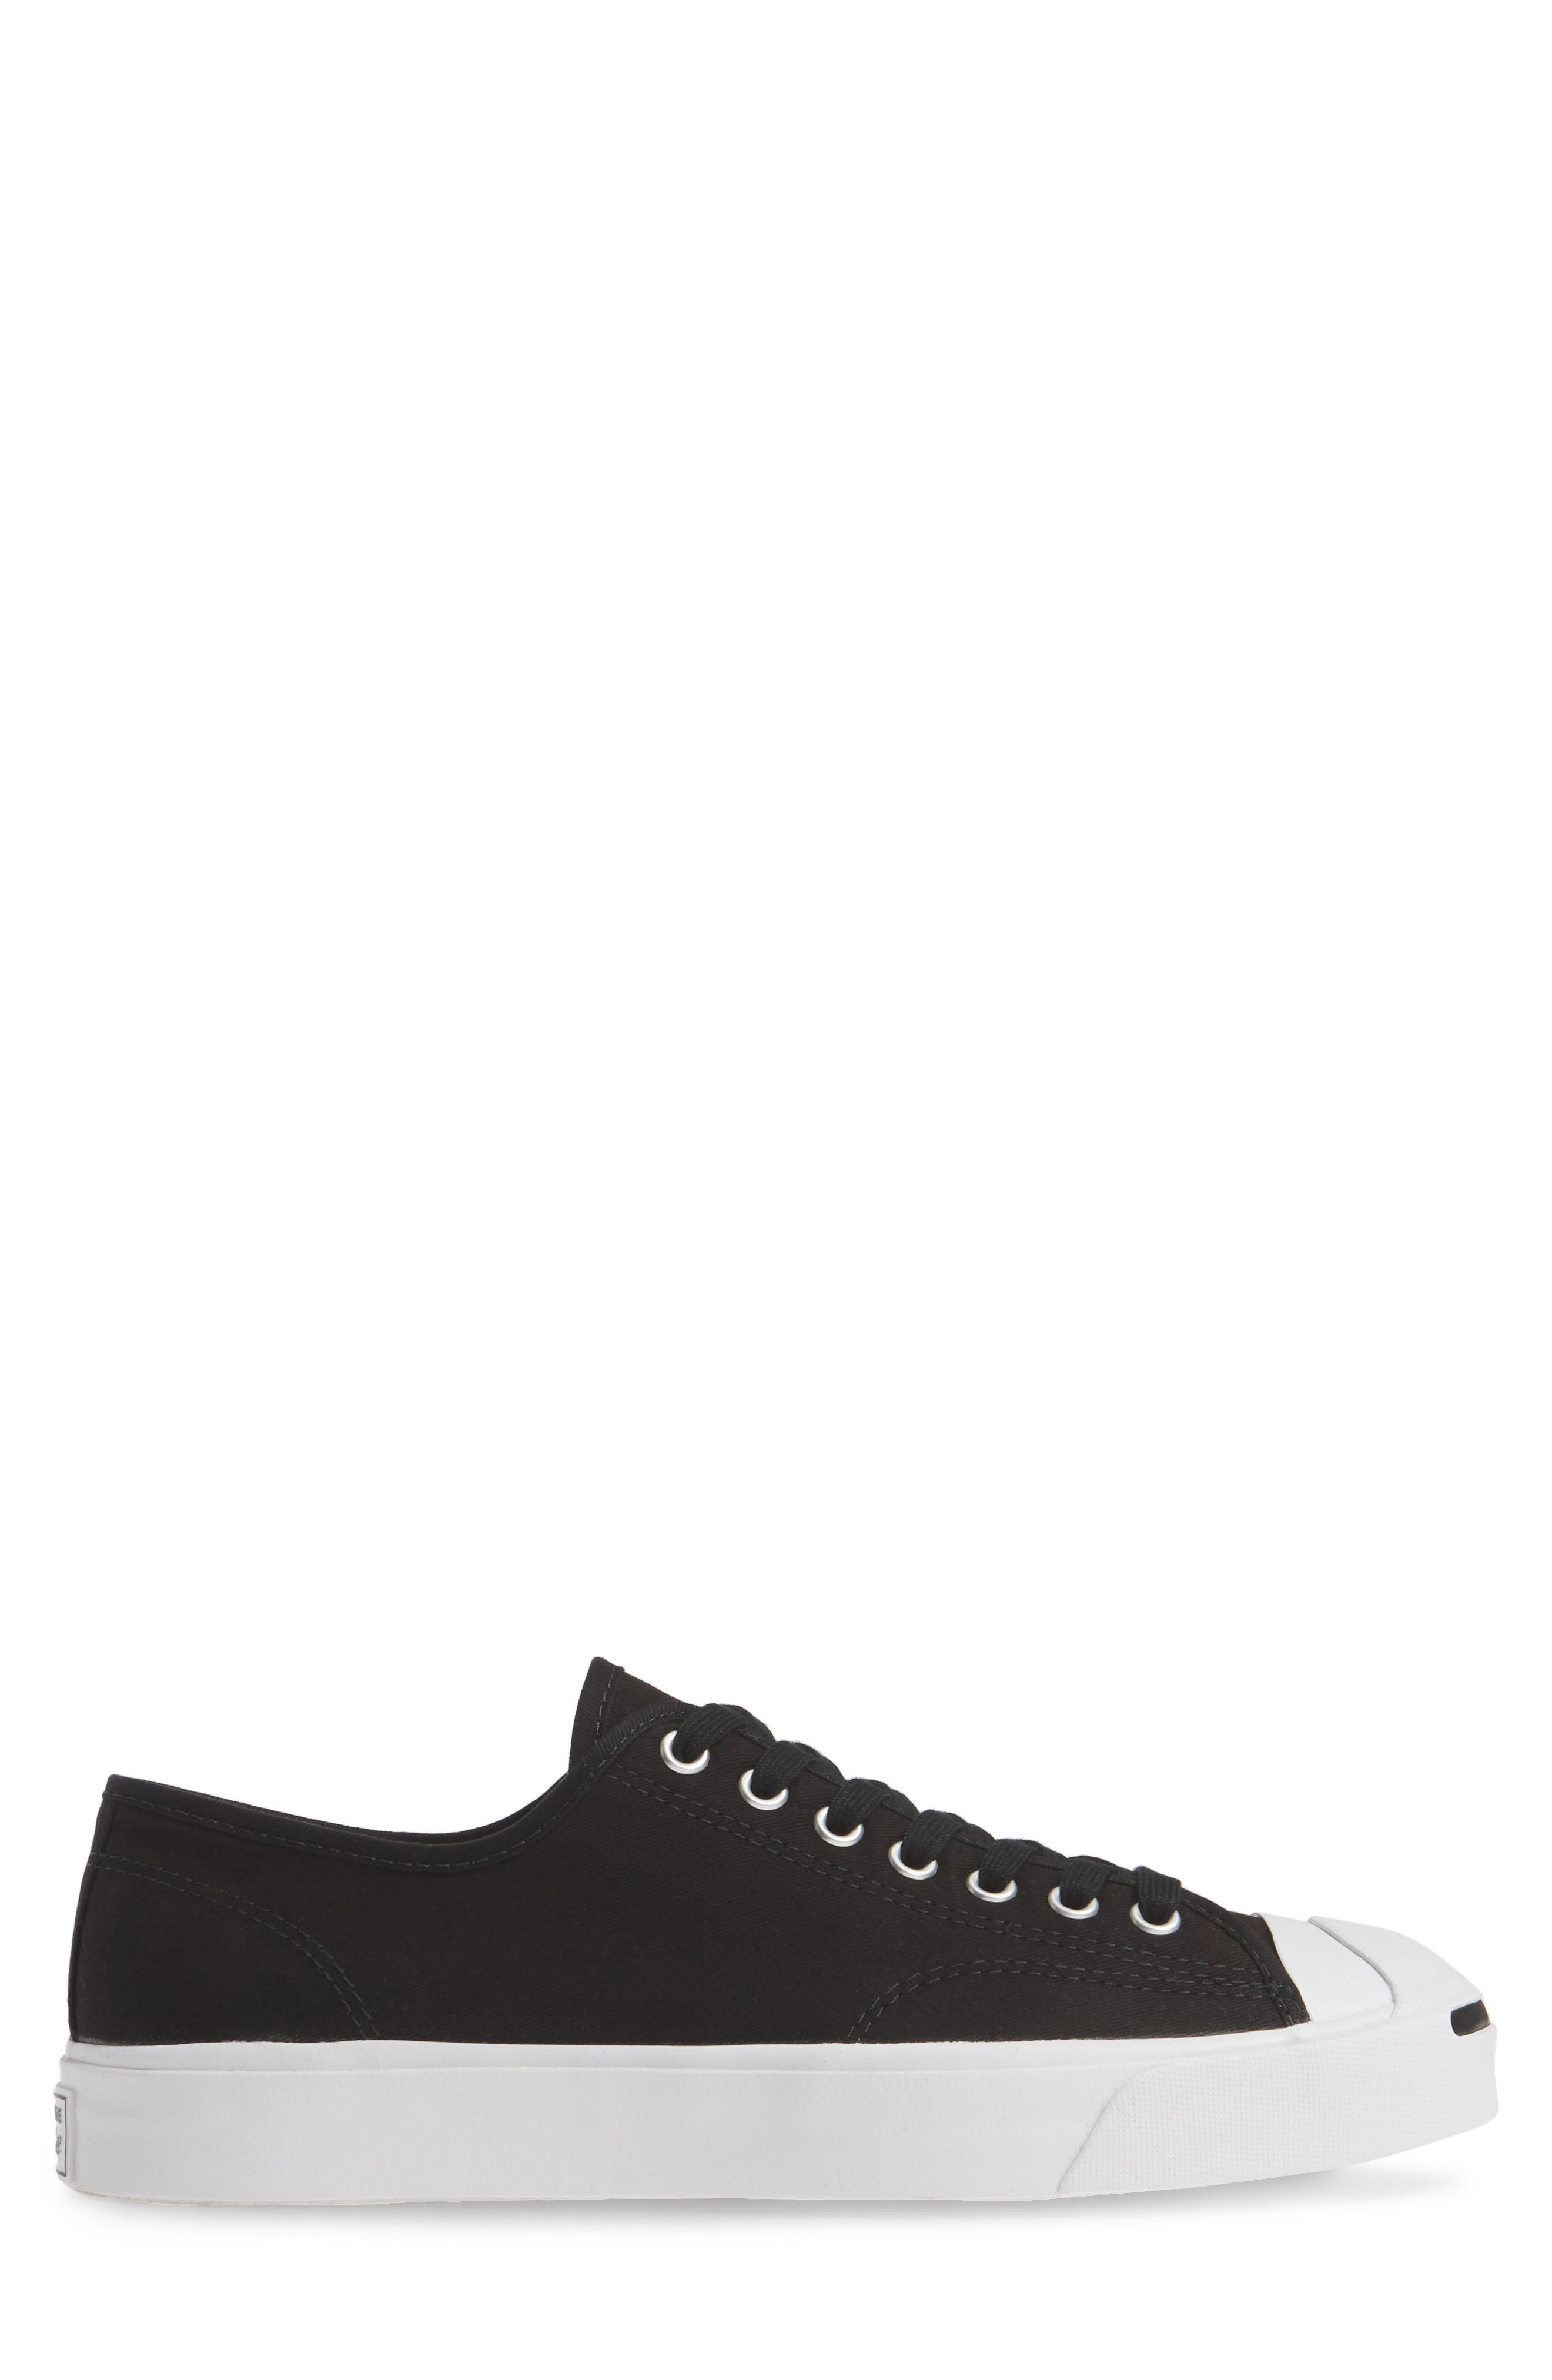 converse jack purcell tennis shoes